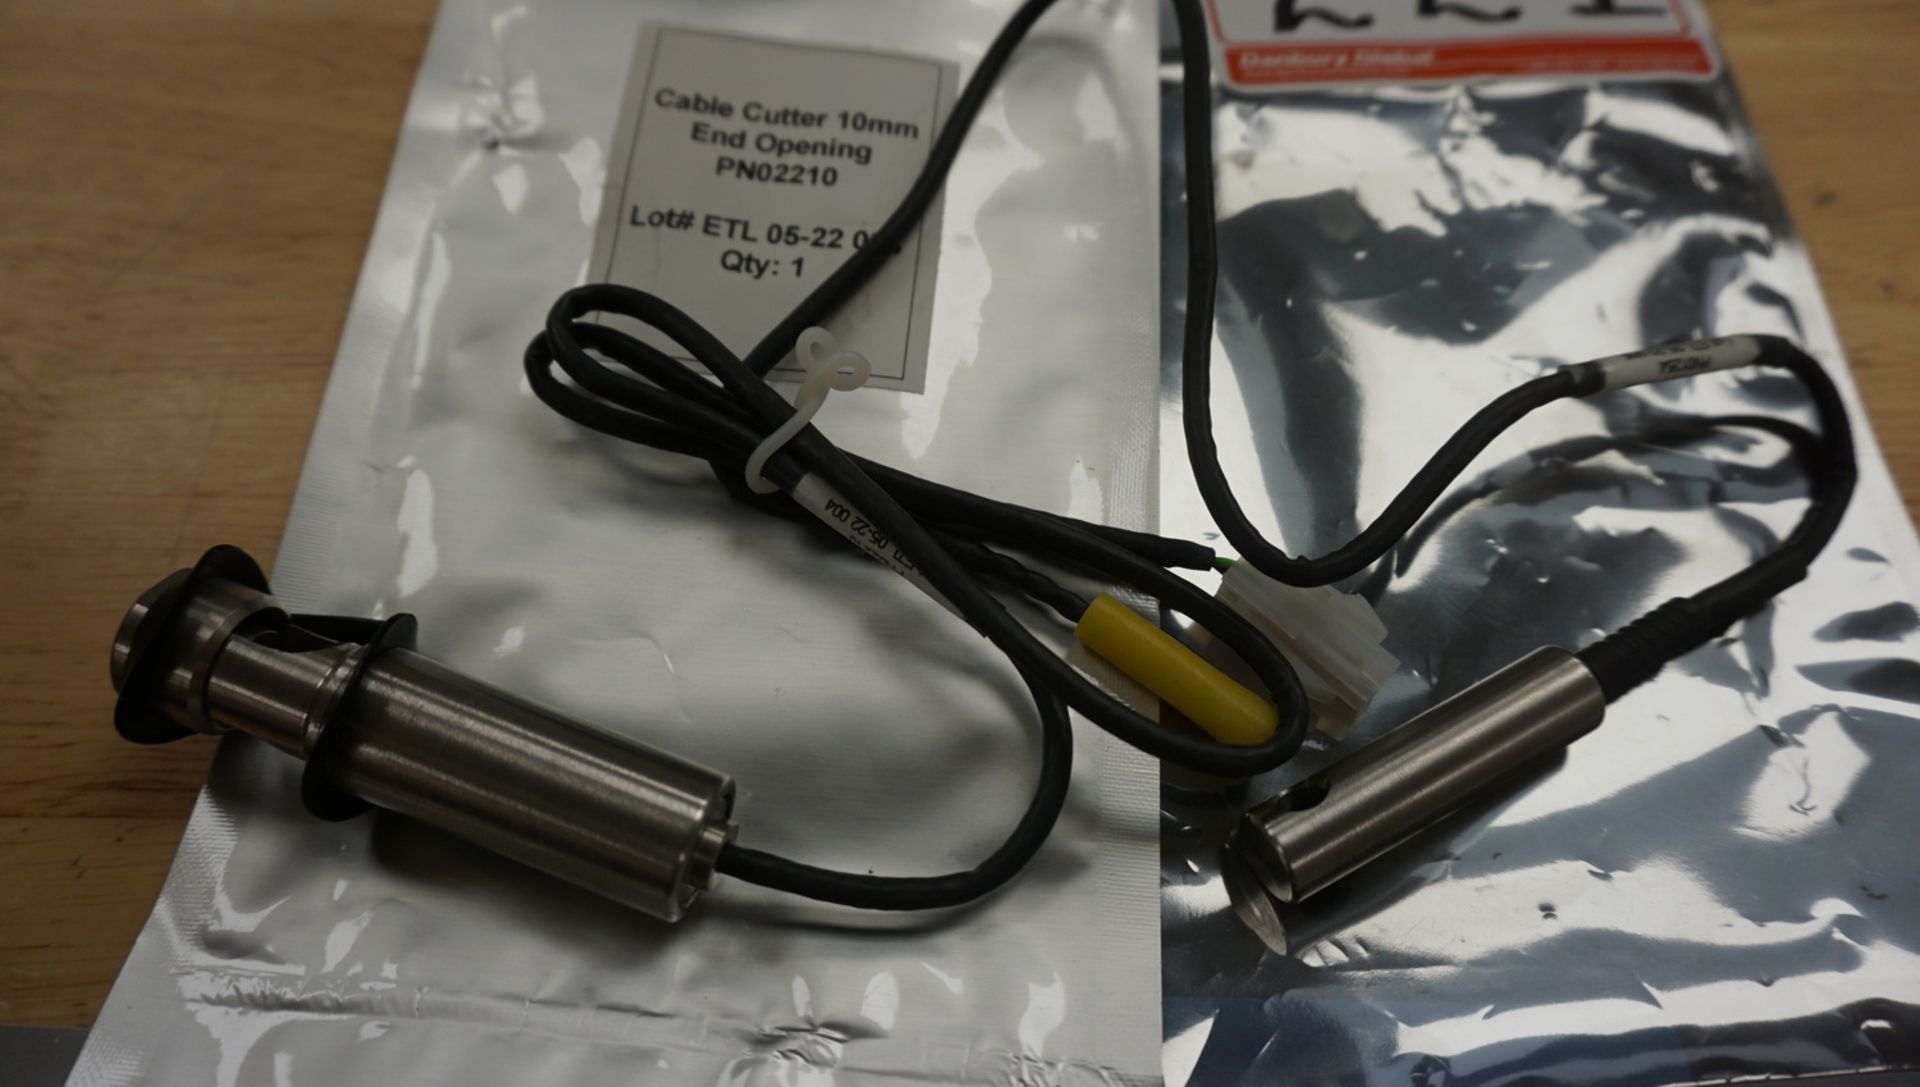 LOT - ENERGETIC (10) CABLE & (1) REEFING CUTTERS 5MM TO 10MM (TOTAL - 9 UNITS SEALED - 2 OPEN) - Image 2 of 6